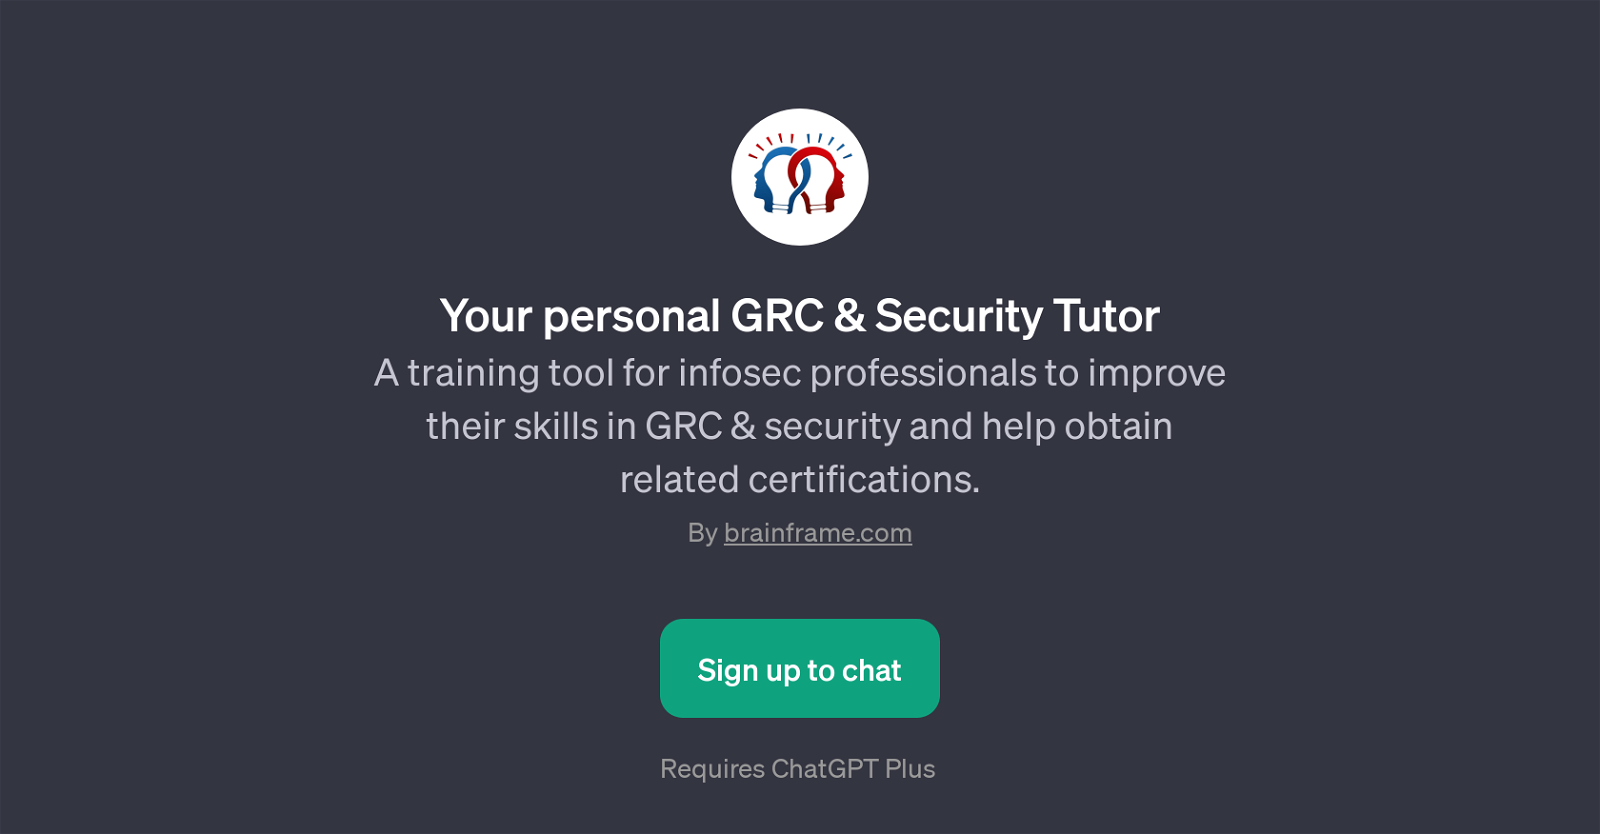 Your Personal GRC & Security Tutor website